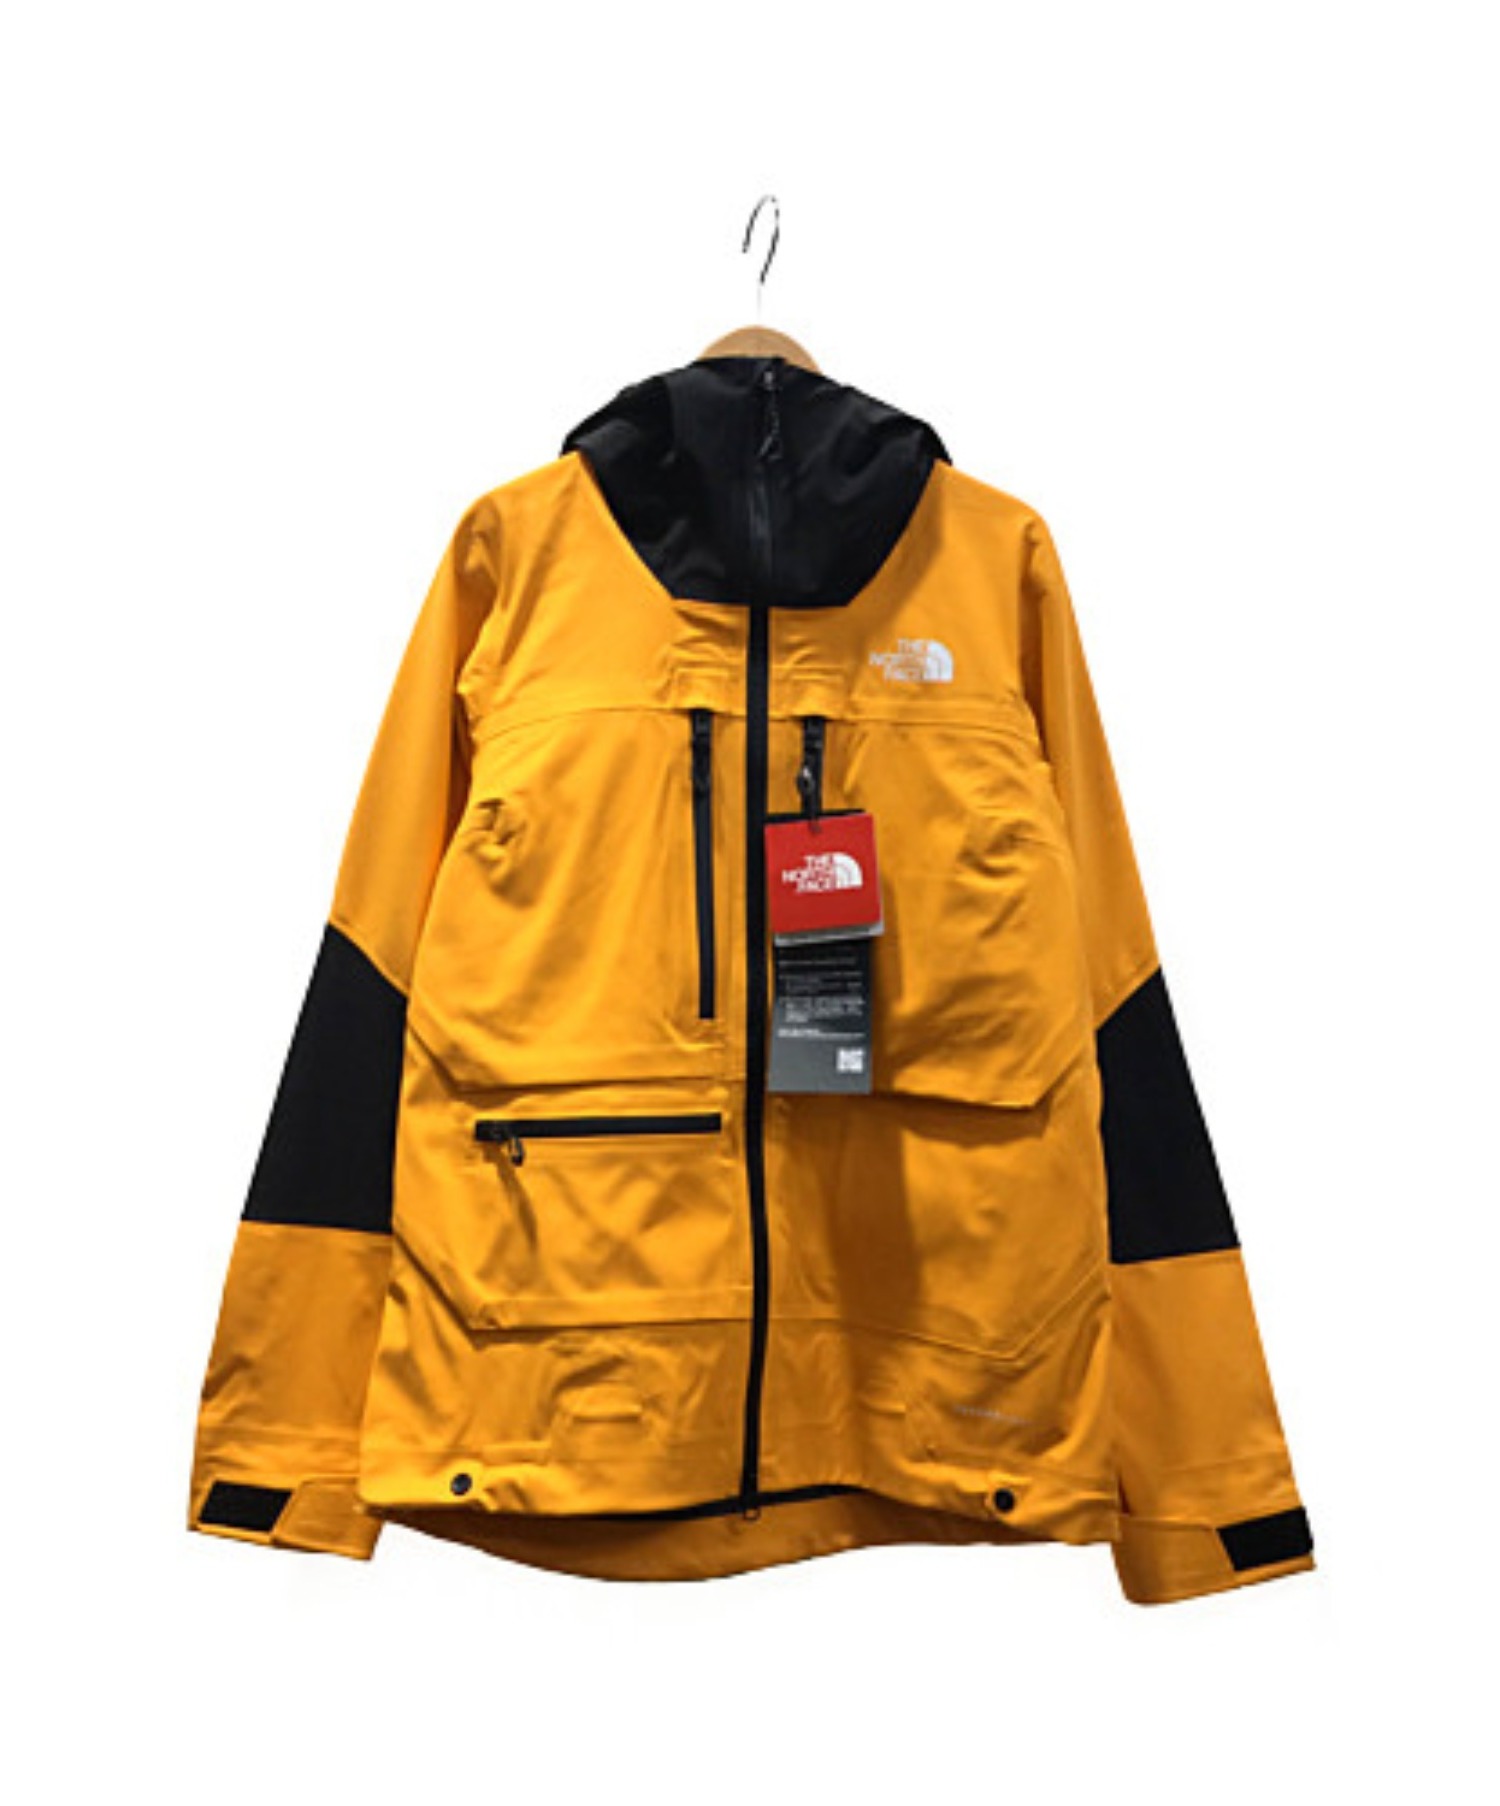 THE NORTH FACE FL L5 JACKET